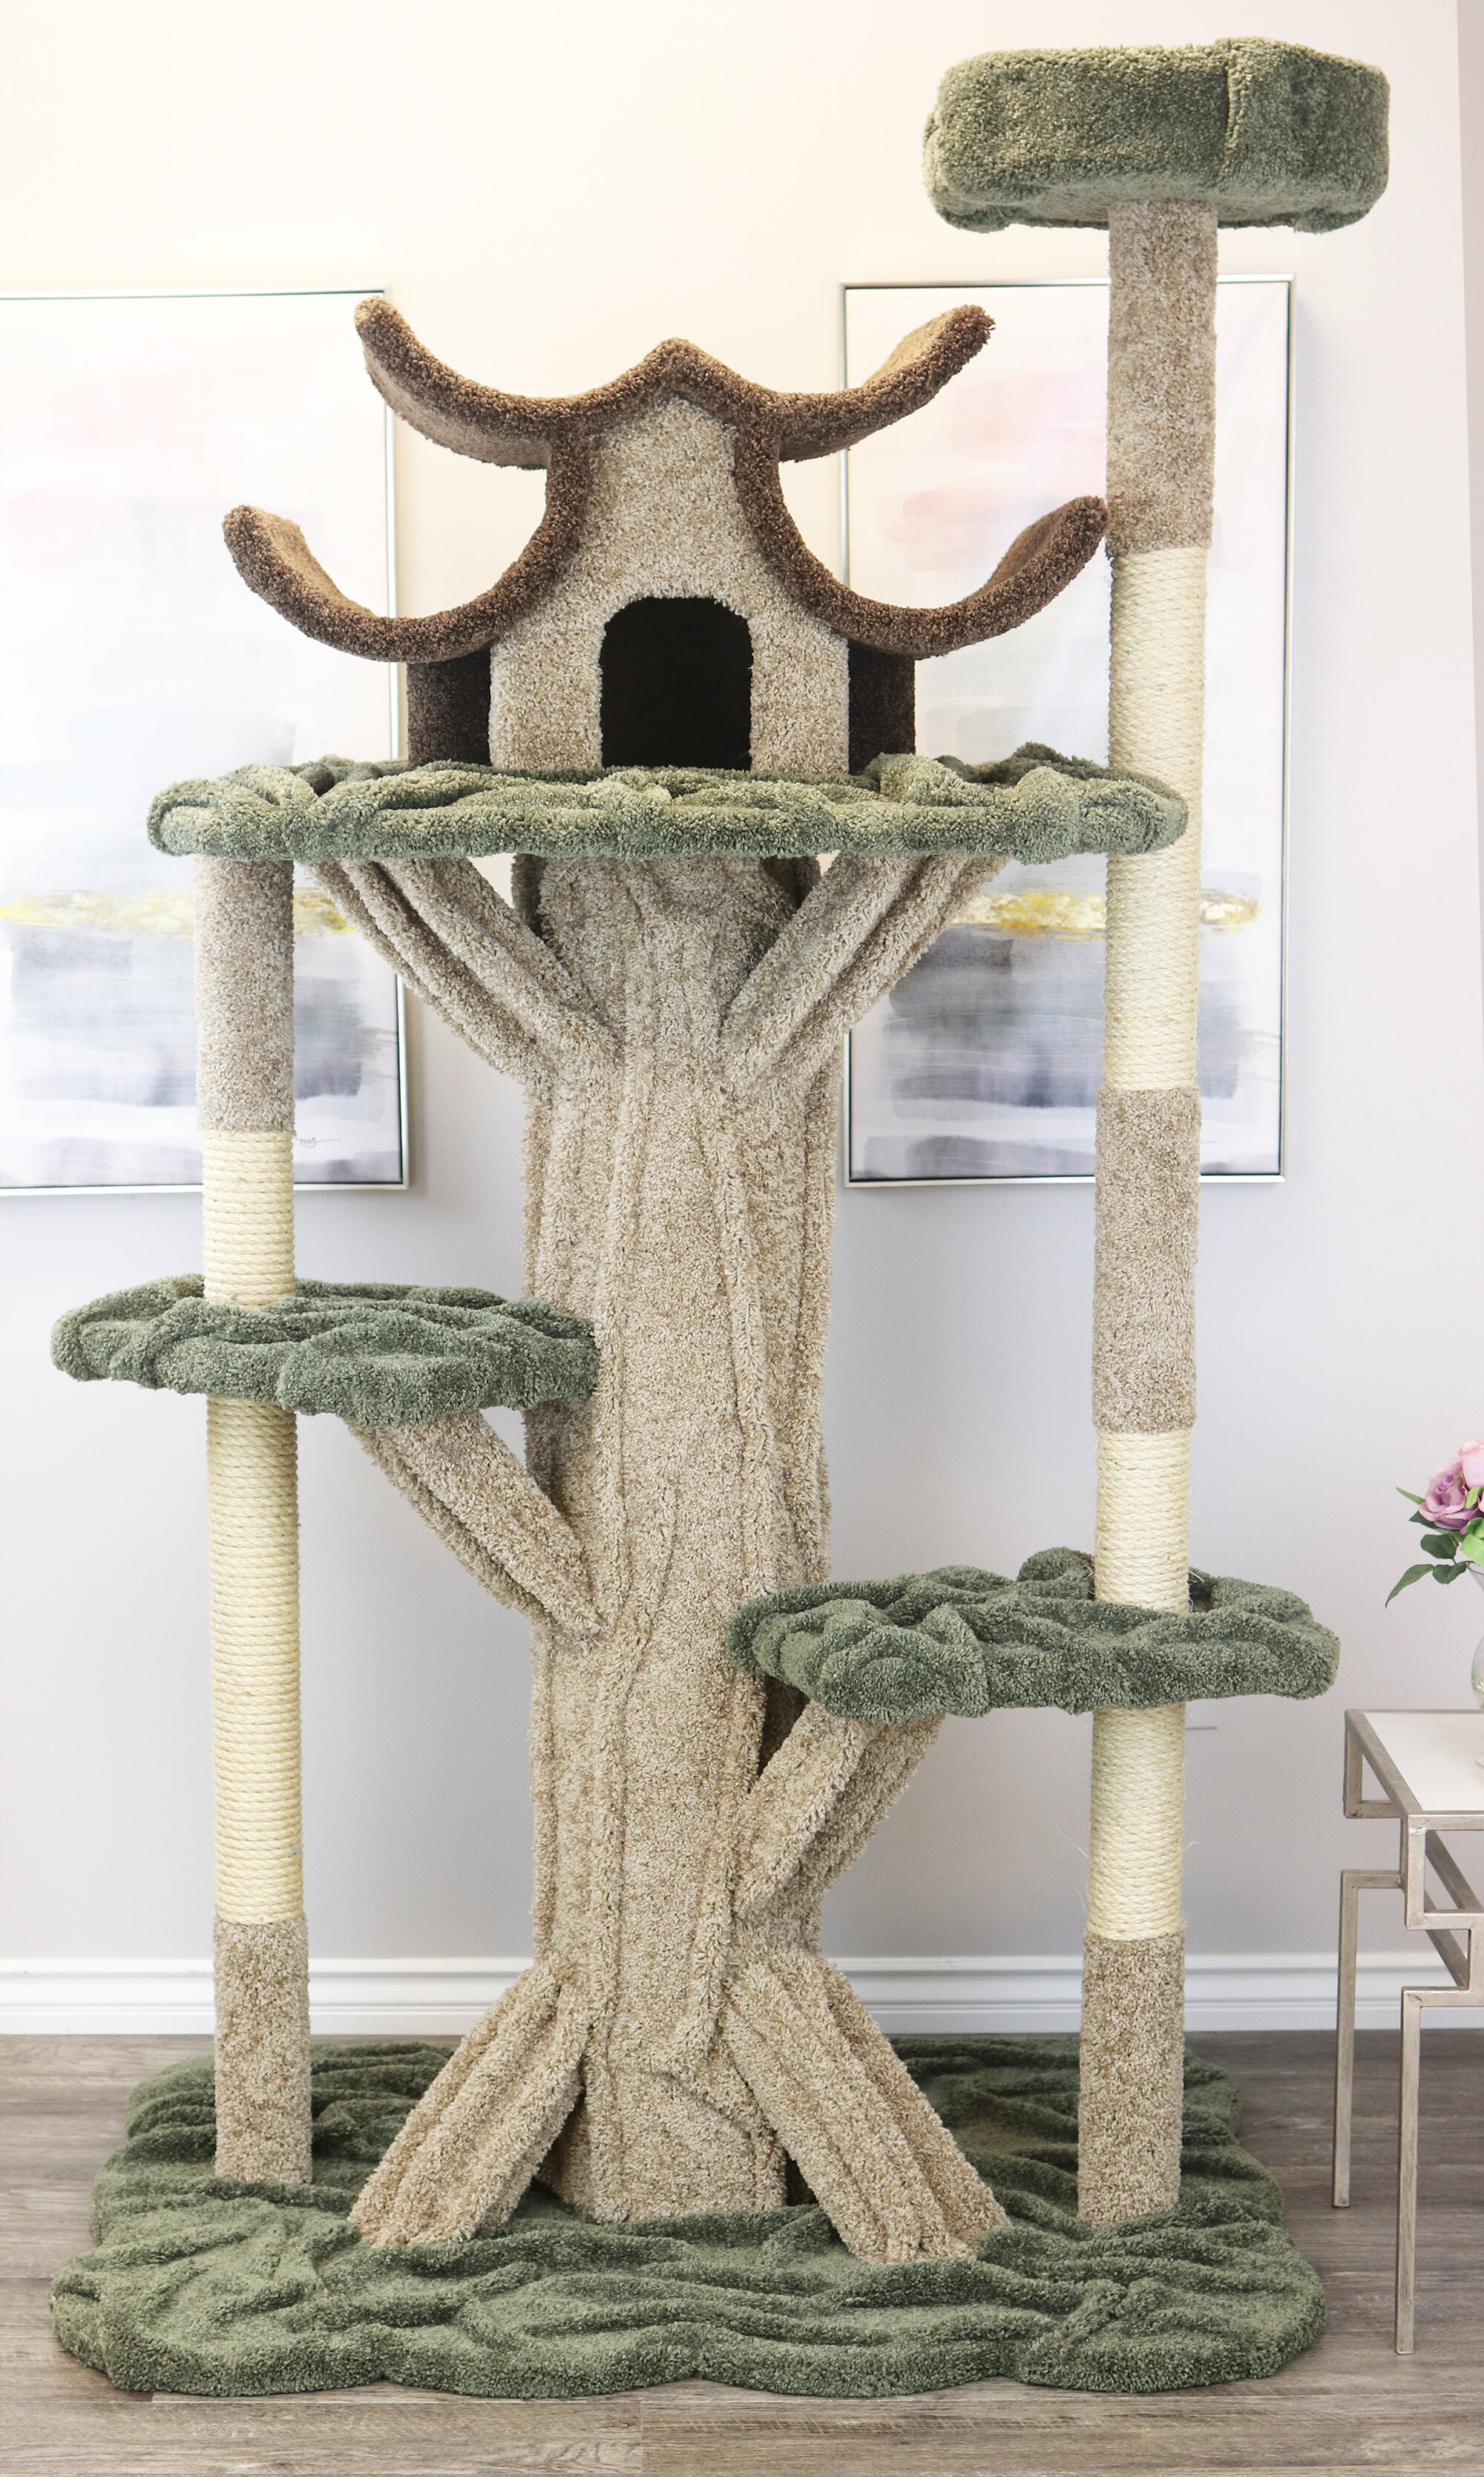 Cat Trees For Large Cats You Ll Love In, Outdoor Cat Trees For Large Cats Uk